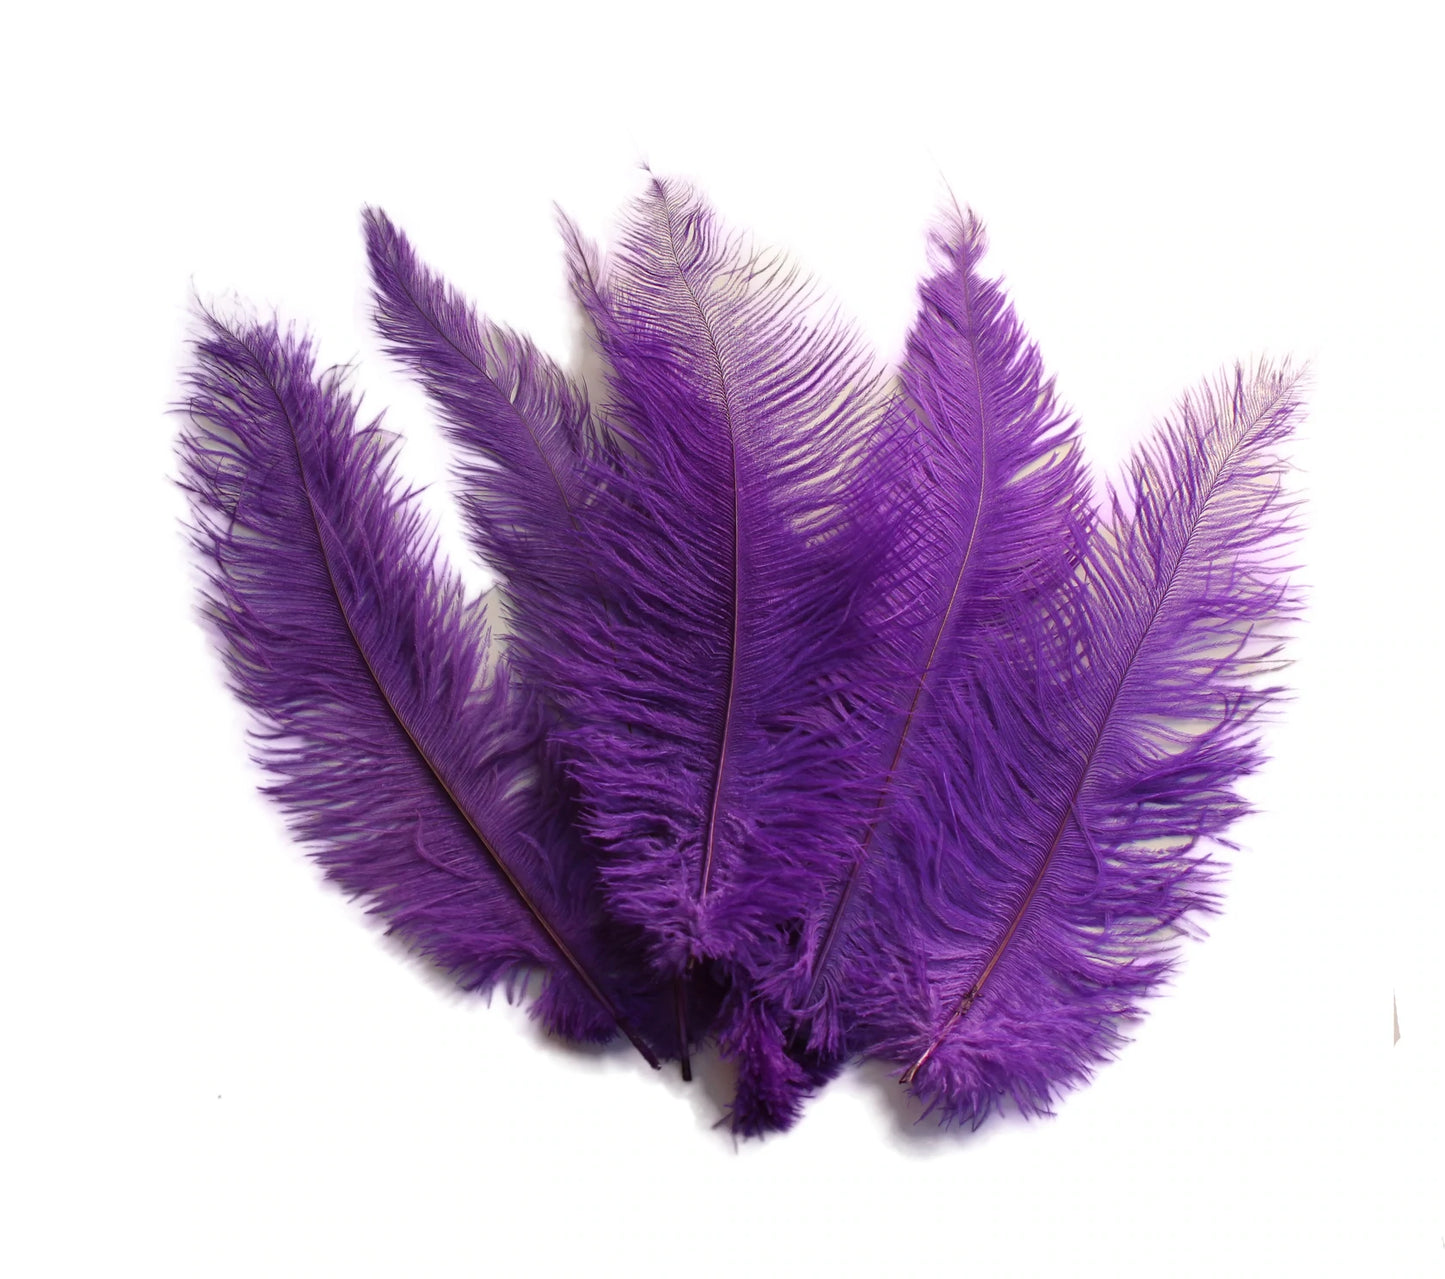 Ostrich Feather Spad Plumes 15-18" (Purple) - Buy Ostrich Feathers